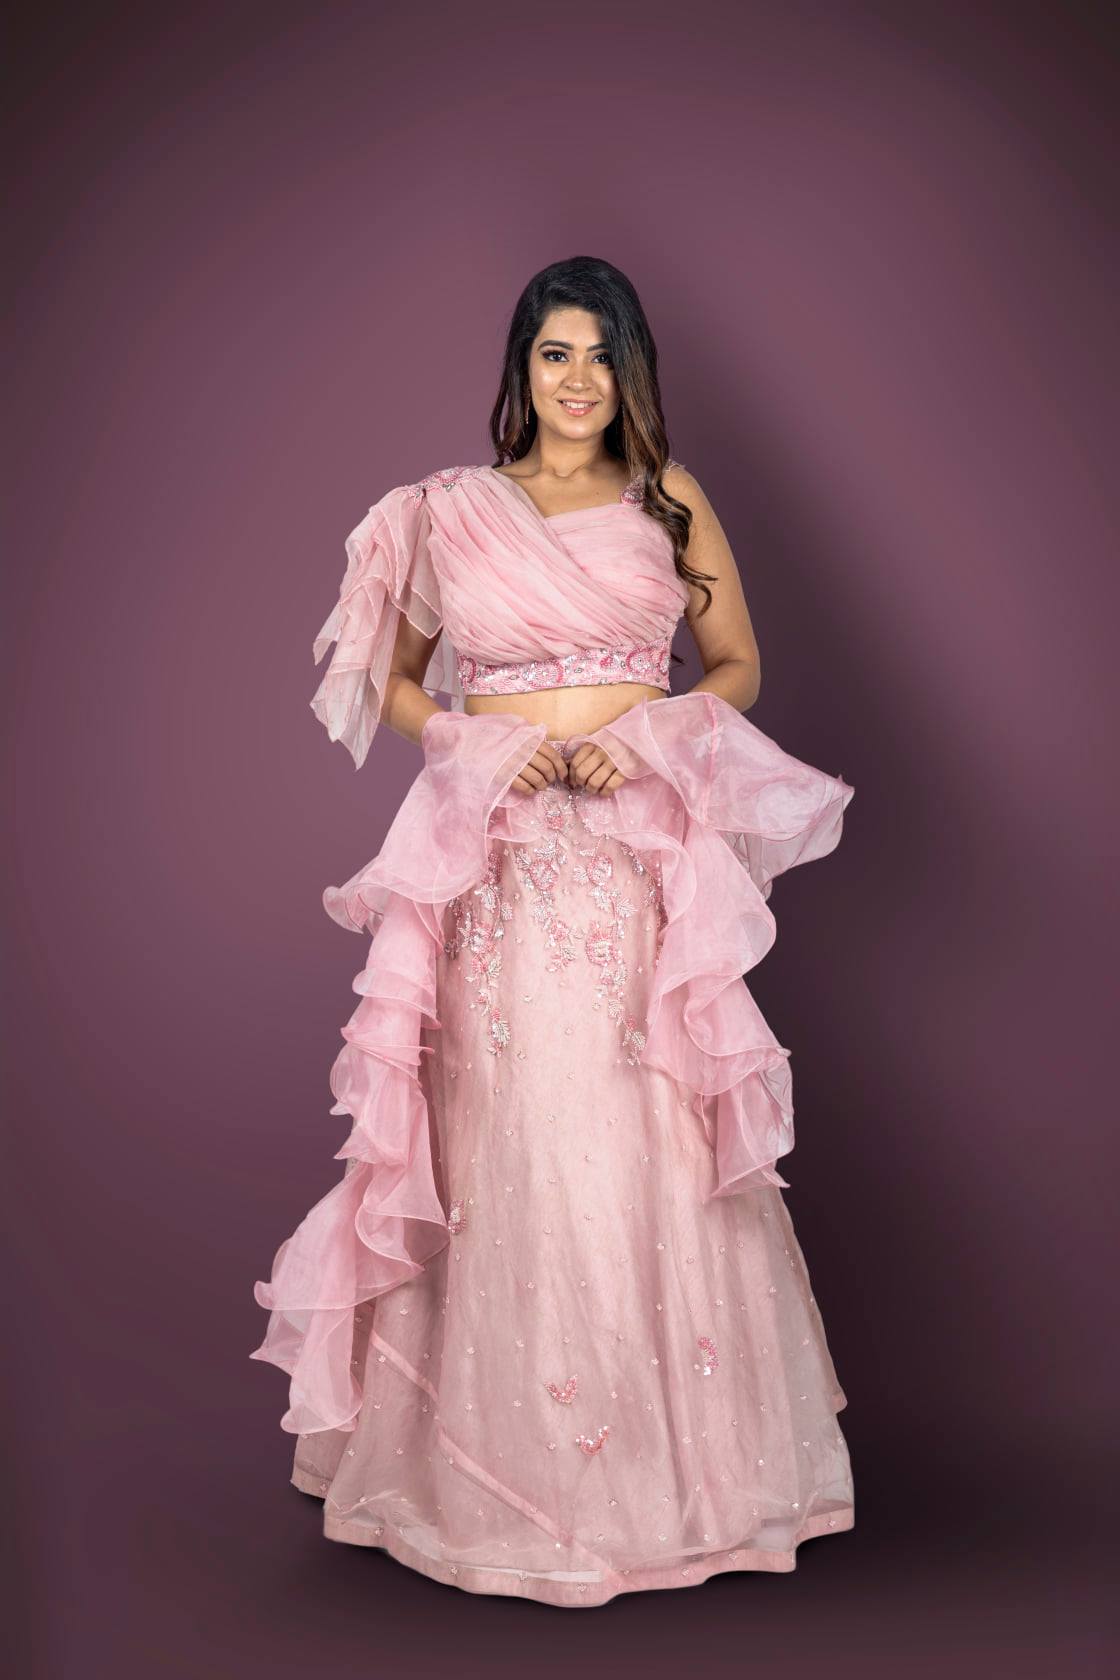 FSPbride Arzoo Dawar looks beautiful in our appliqué lehenga with embellis…  | Designer saree blouse patterns, Professional outfits women, Indian  engagement outfit